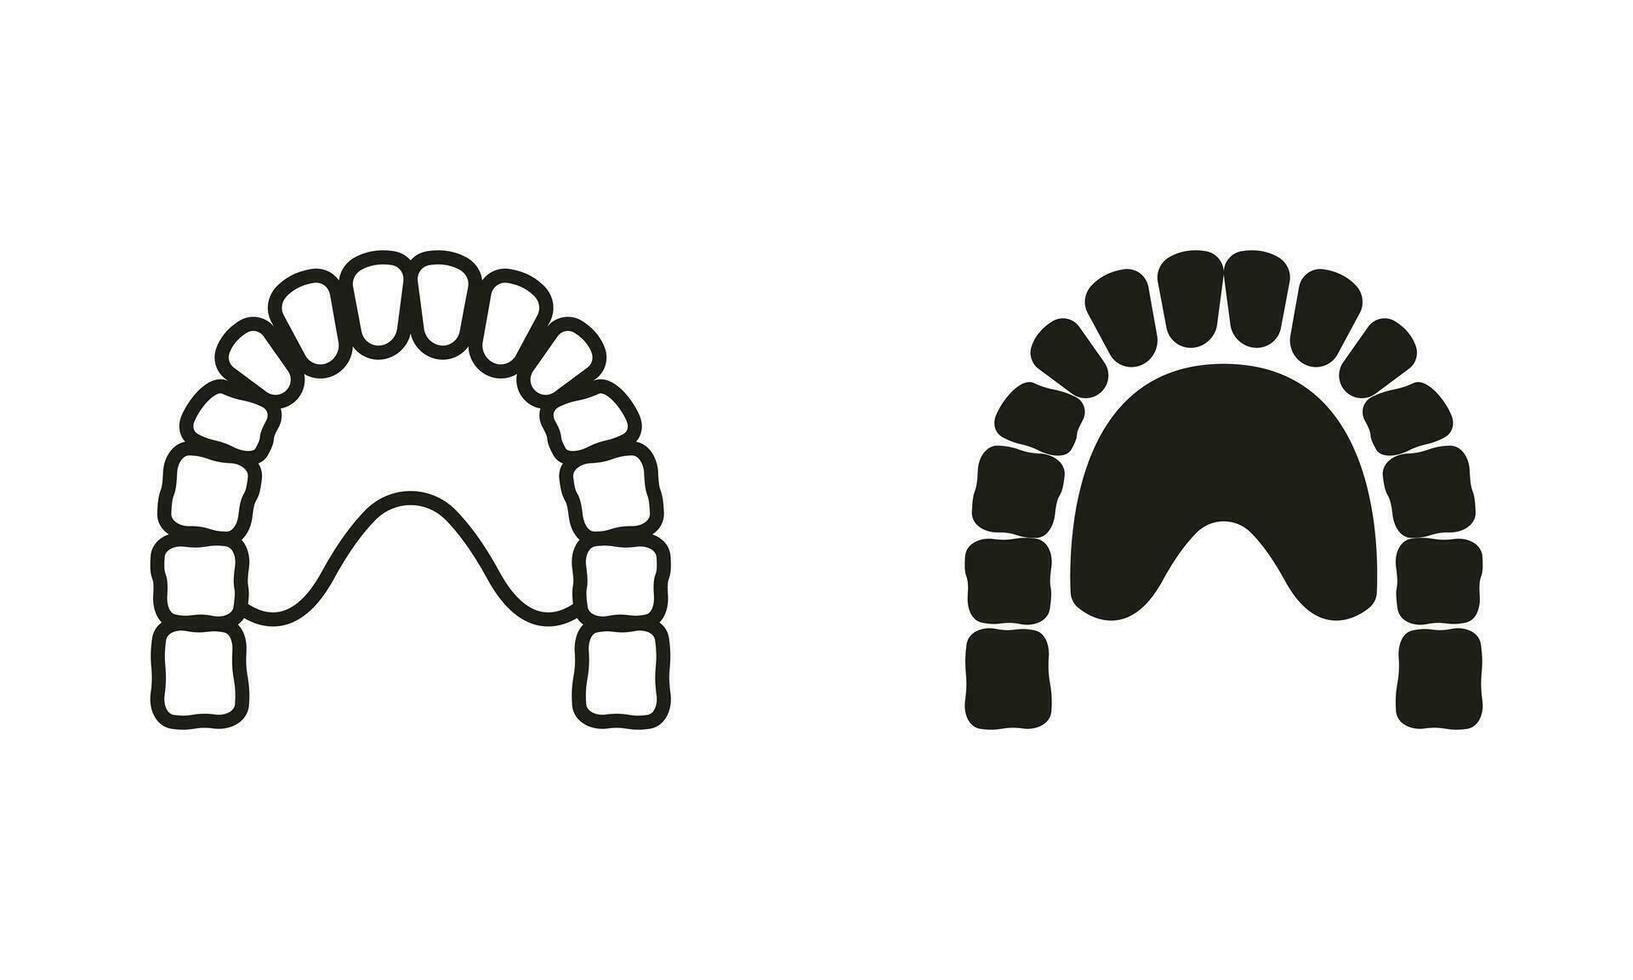 Human Jaw with Teeth and Tongue Silhouette and Line Icons Set. Maxilla, Lower Jaw Pictogram. Jawbone Physiology. Dental Treatment, Dentistry Black Symbol Collection. Isolated Vector Illustration.